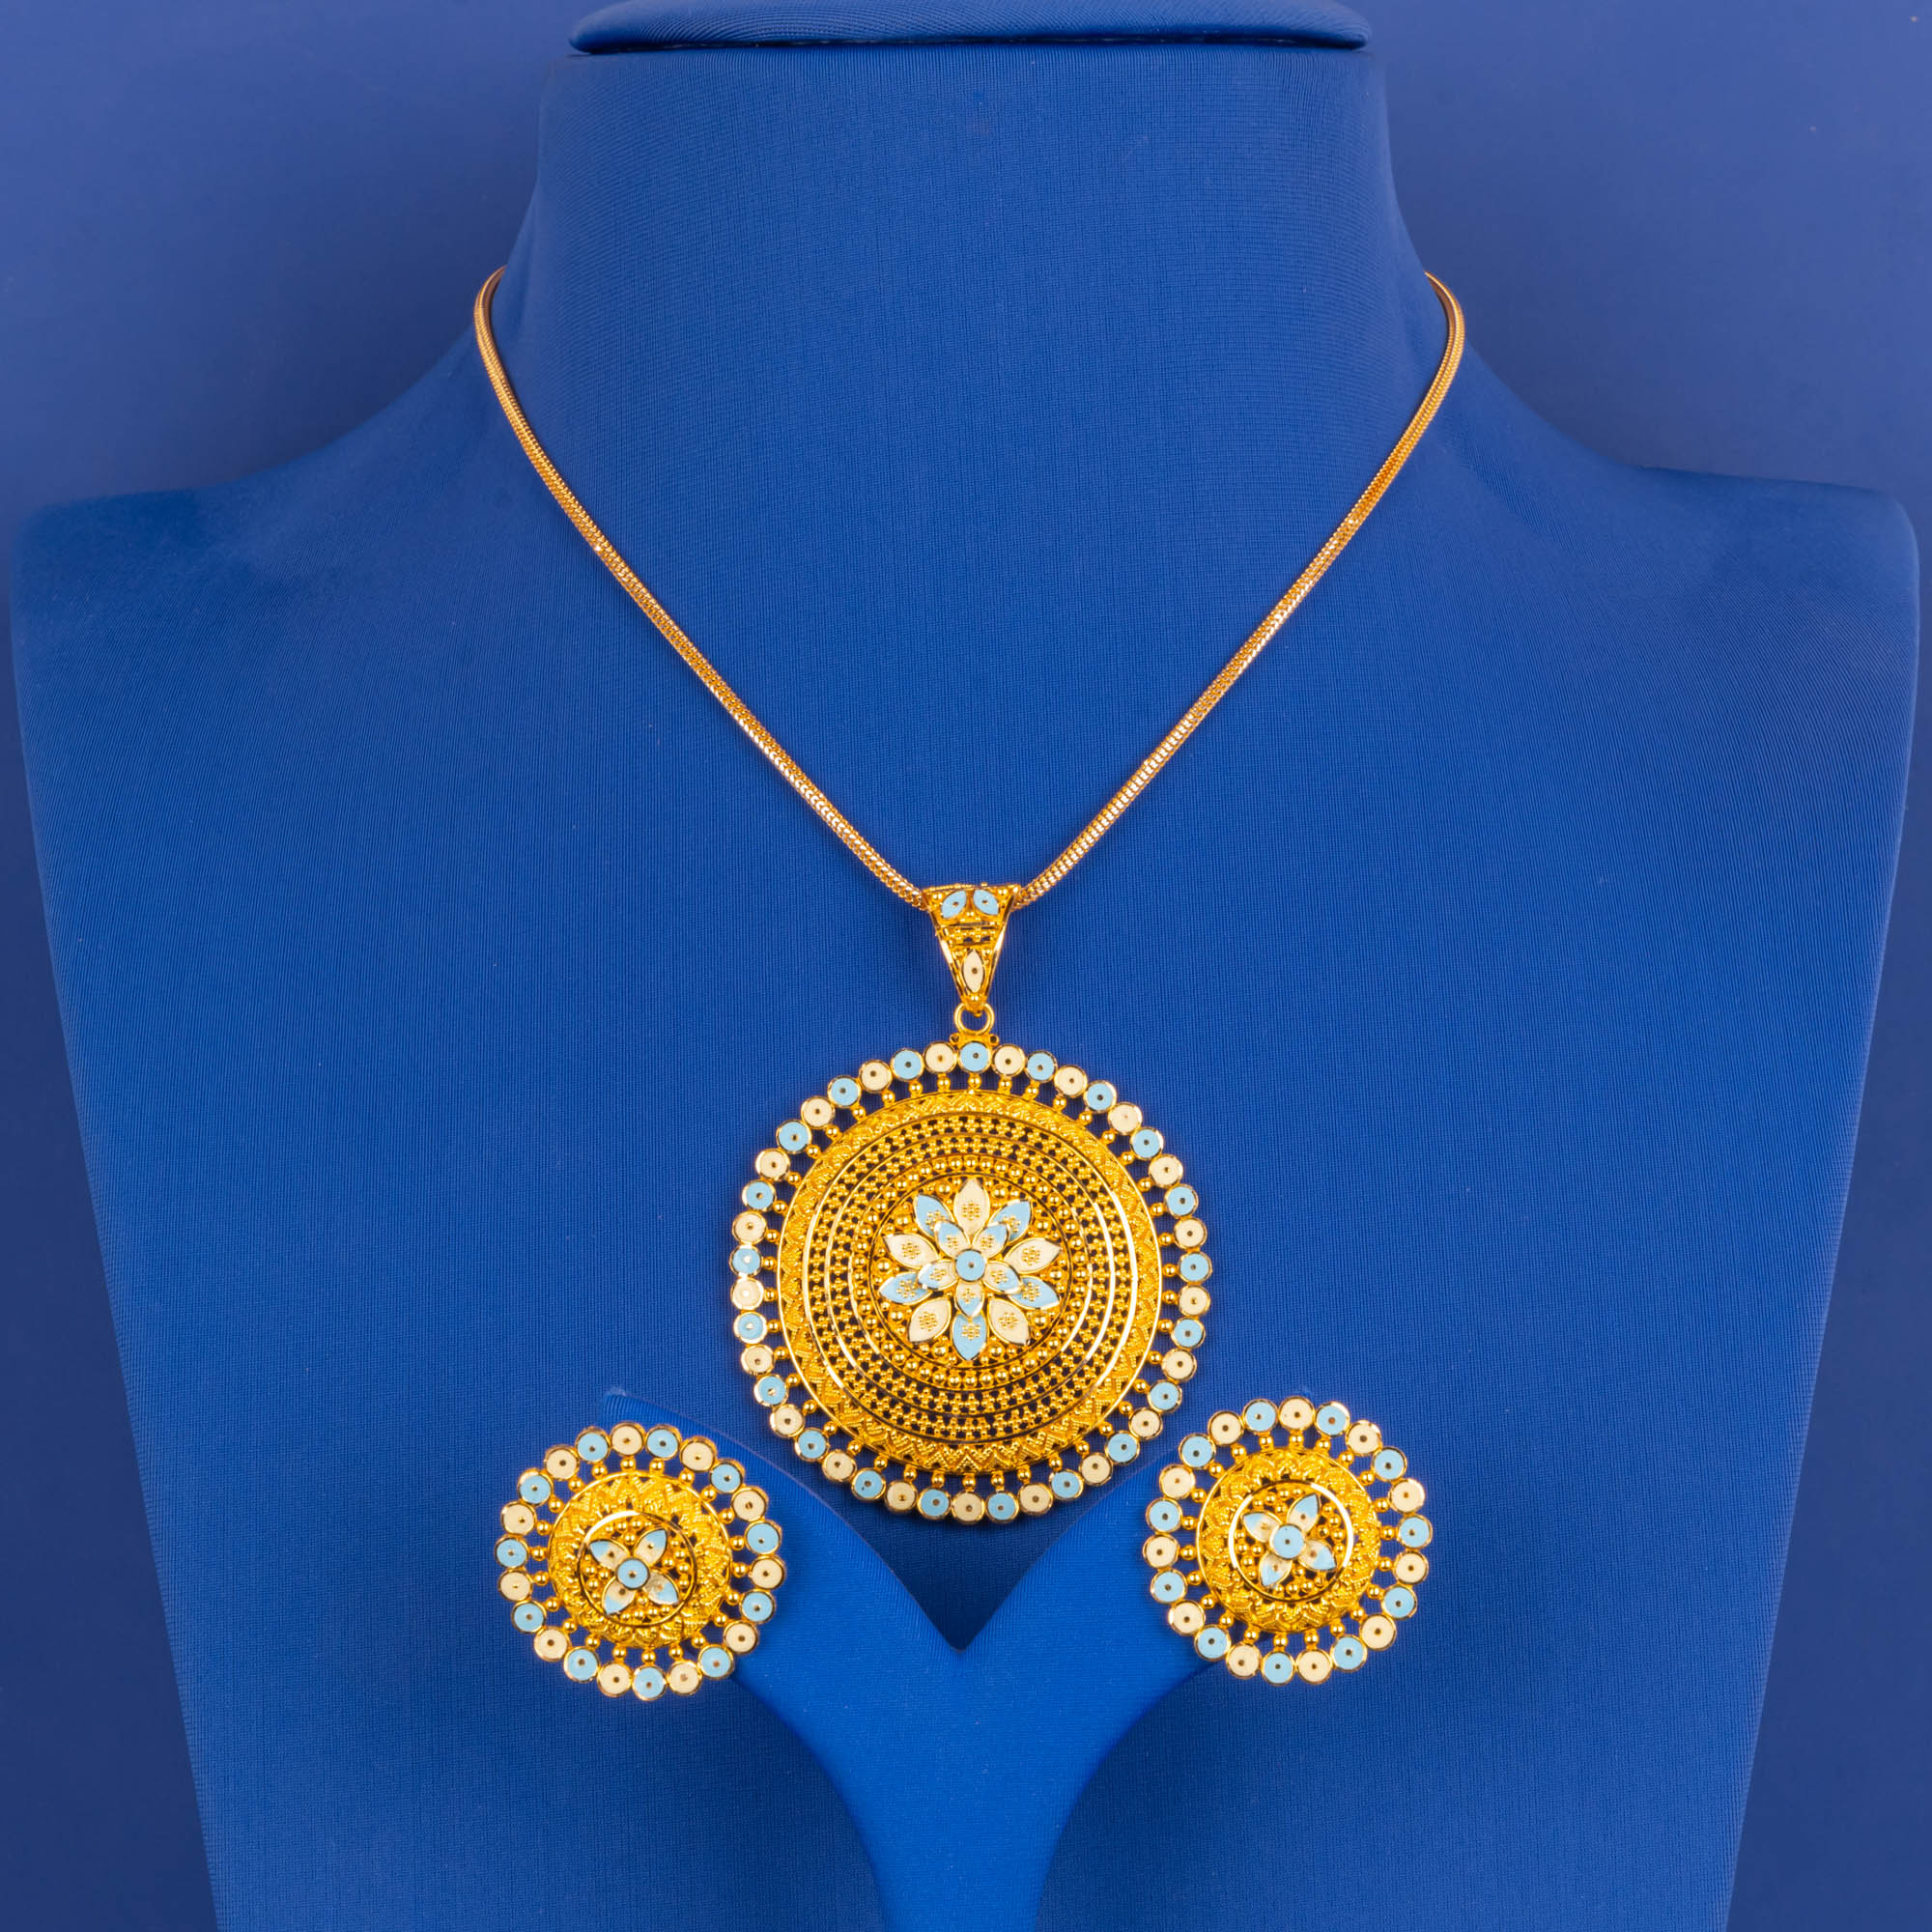 22K Gold Minakari Pendant and Earring Set (chain not included)